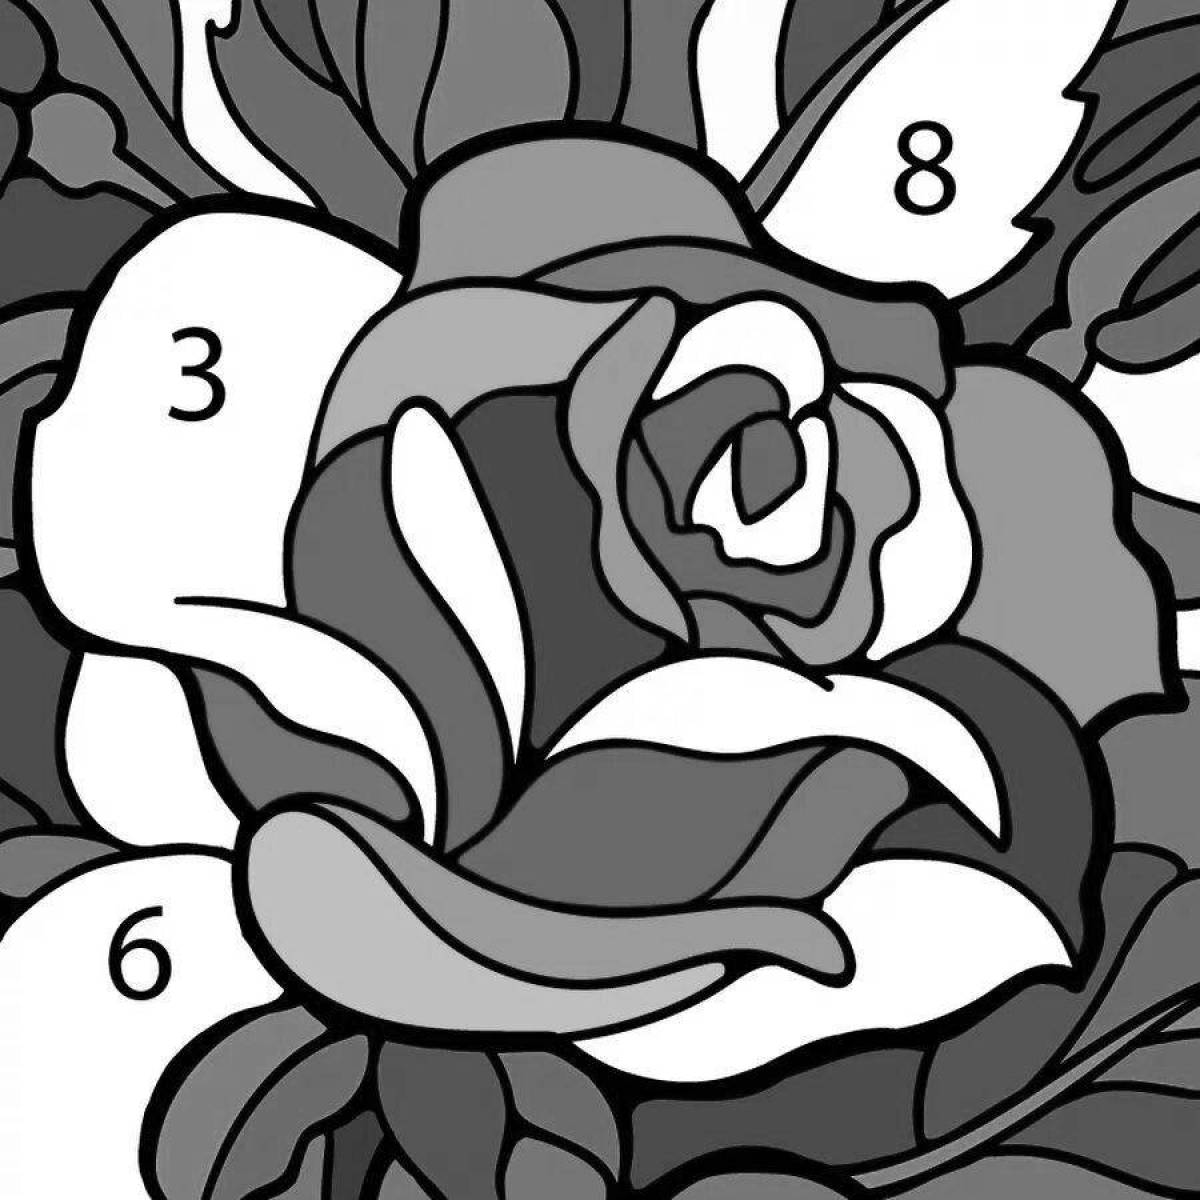 App glowing coloring page by numbers offline